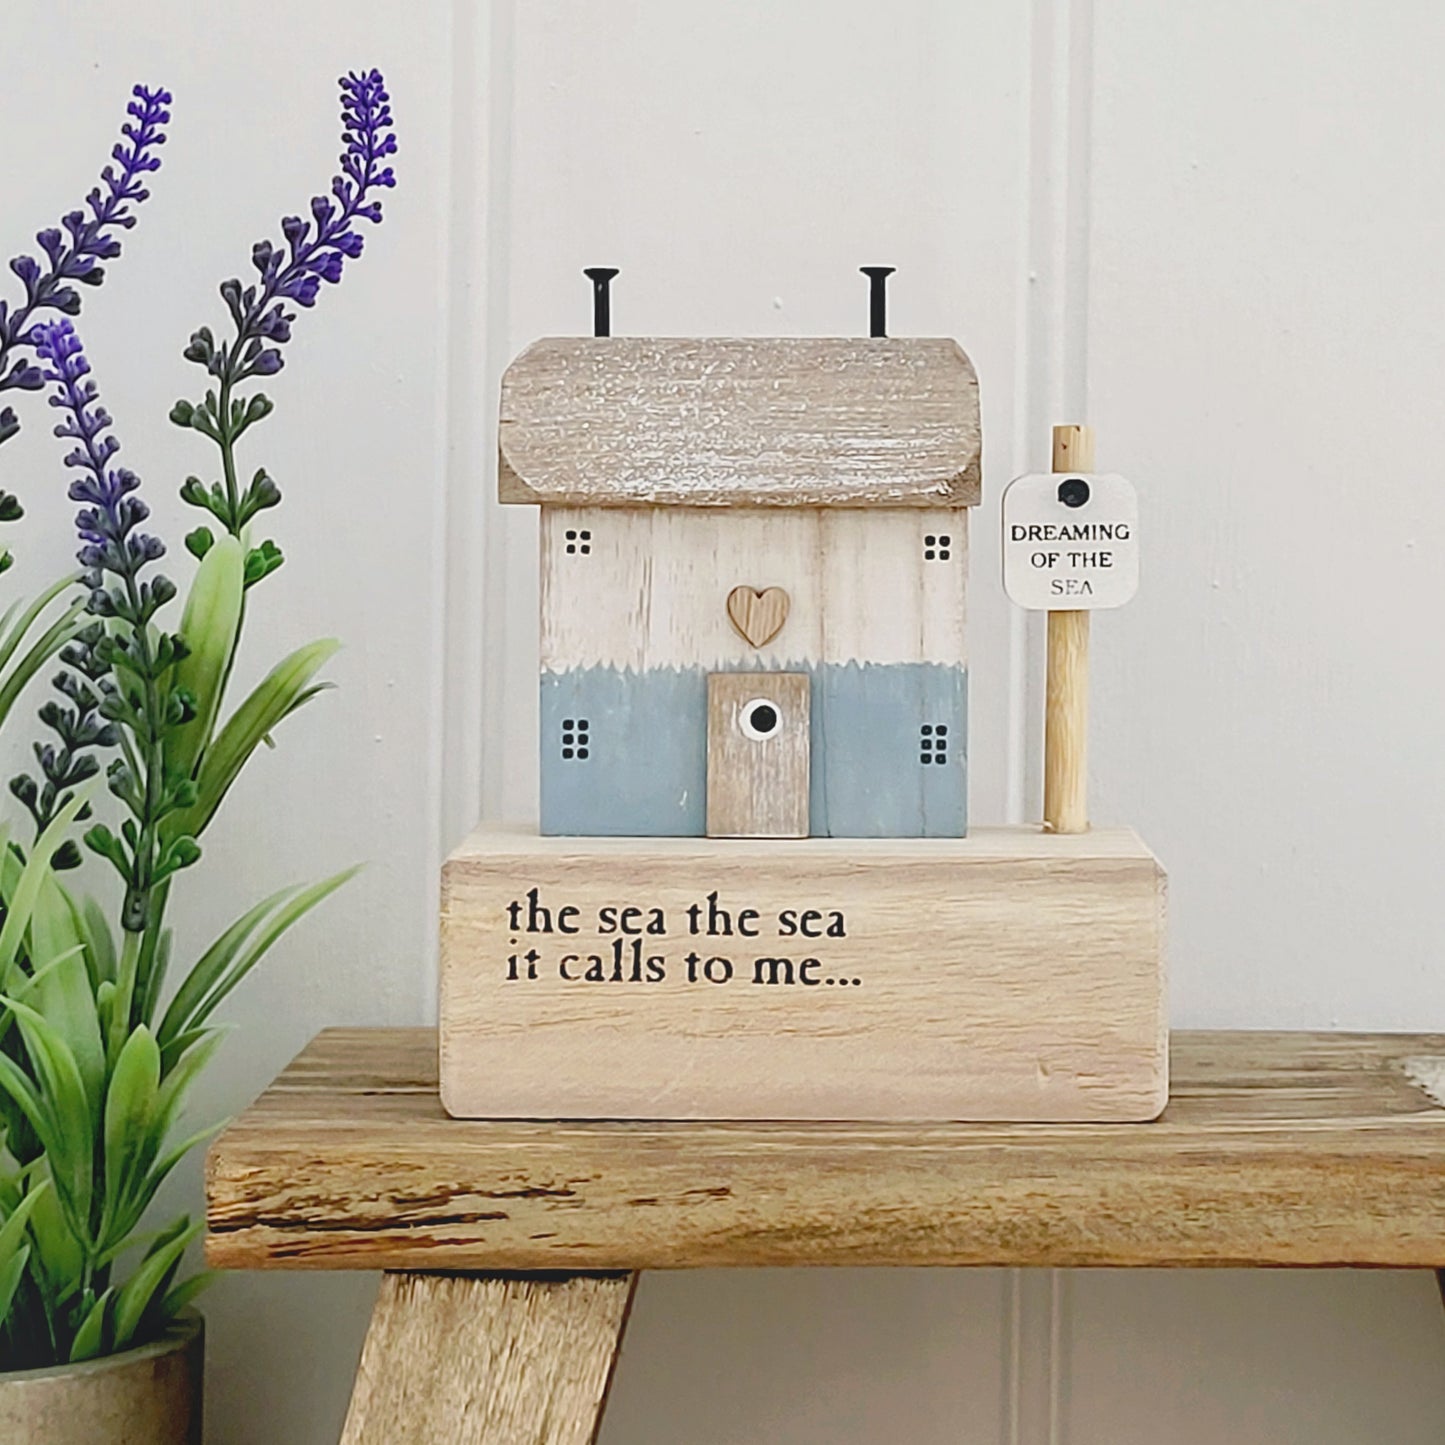 The Sea Calls To Me Wooden House Ornament